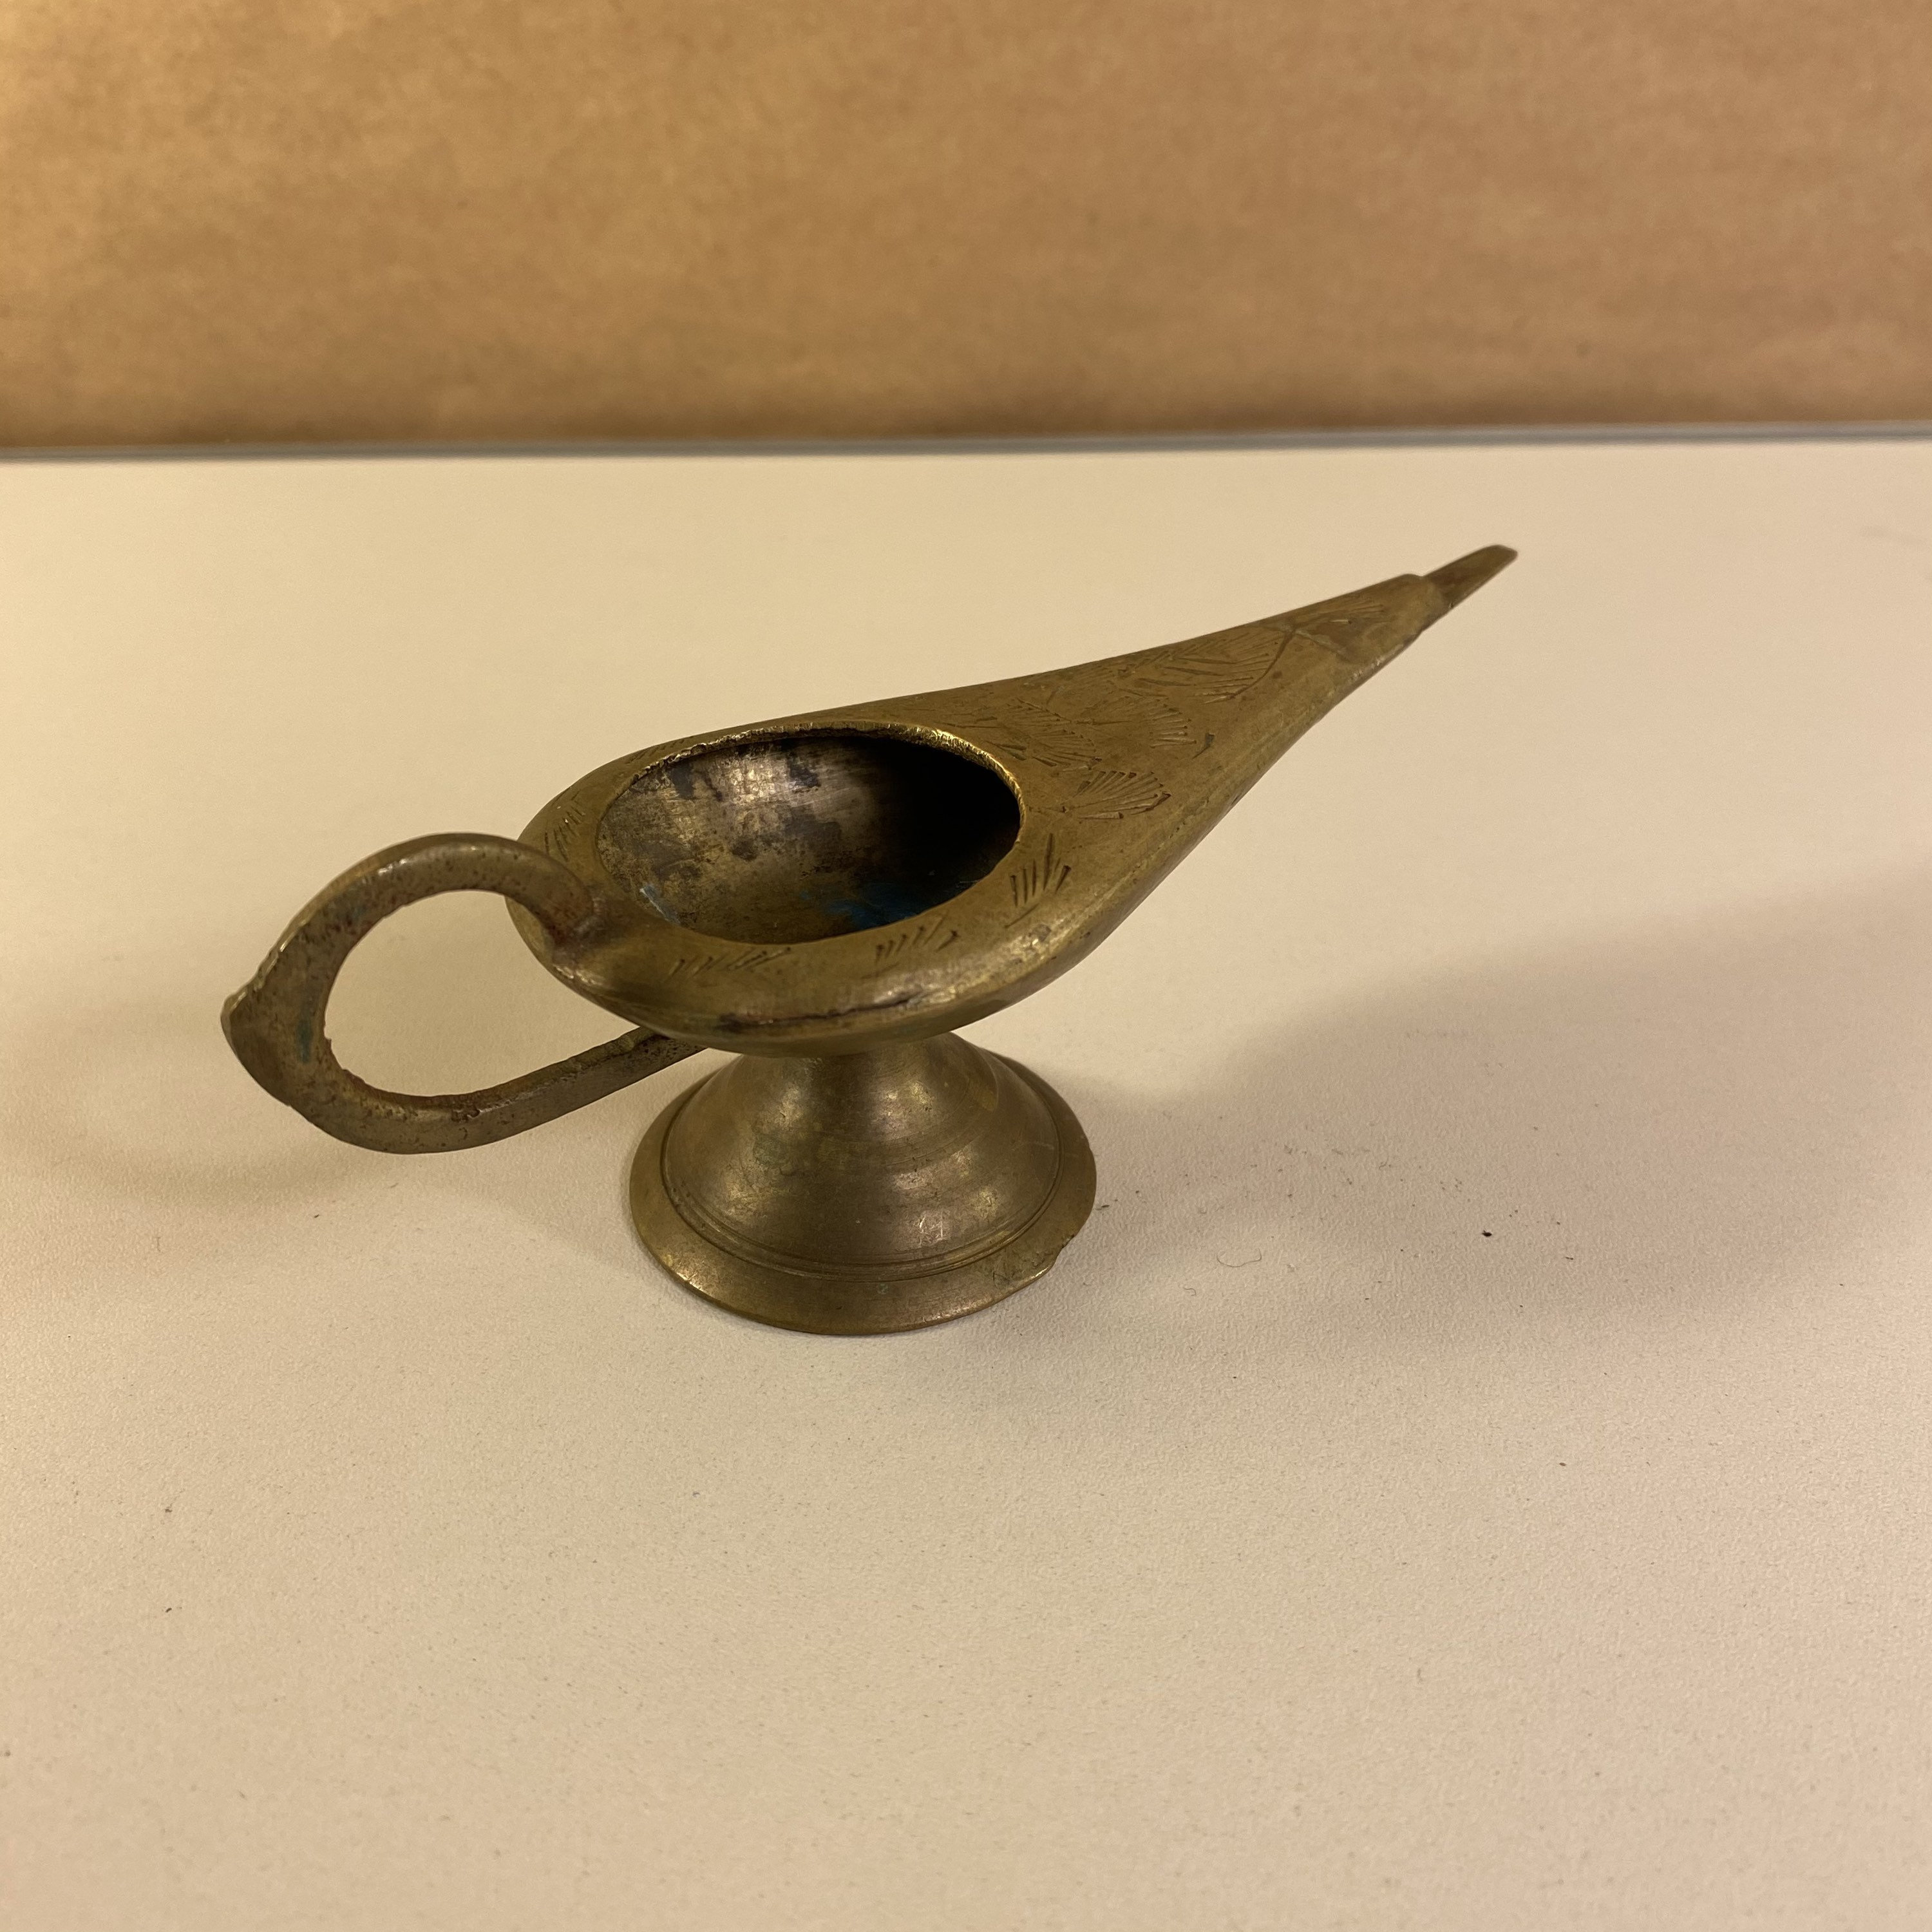 Brass Incense Genie Lamp, Unique Incense Burner, India Brass, Solid Metal,  Cute Little Incense Dish, Unusual Incense Holder, Free Shipping -   Canada